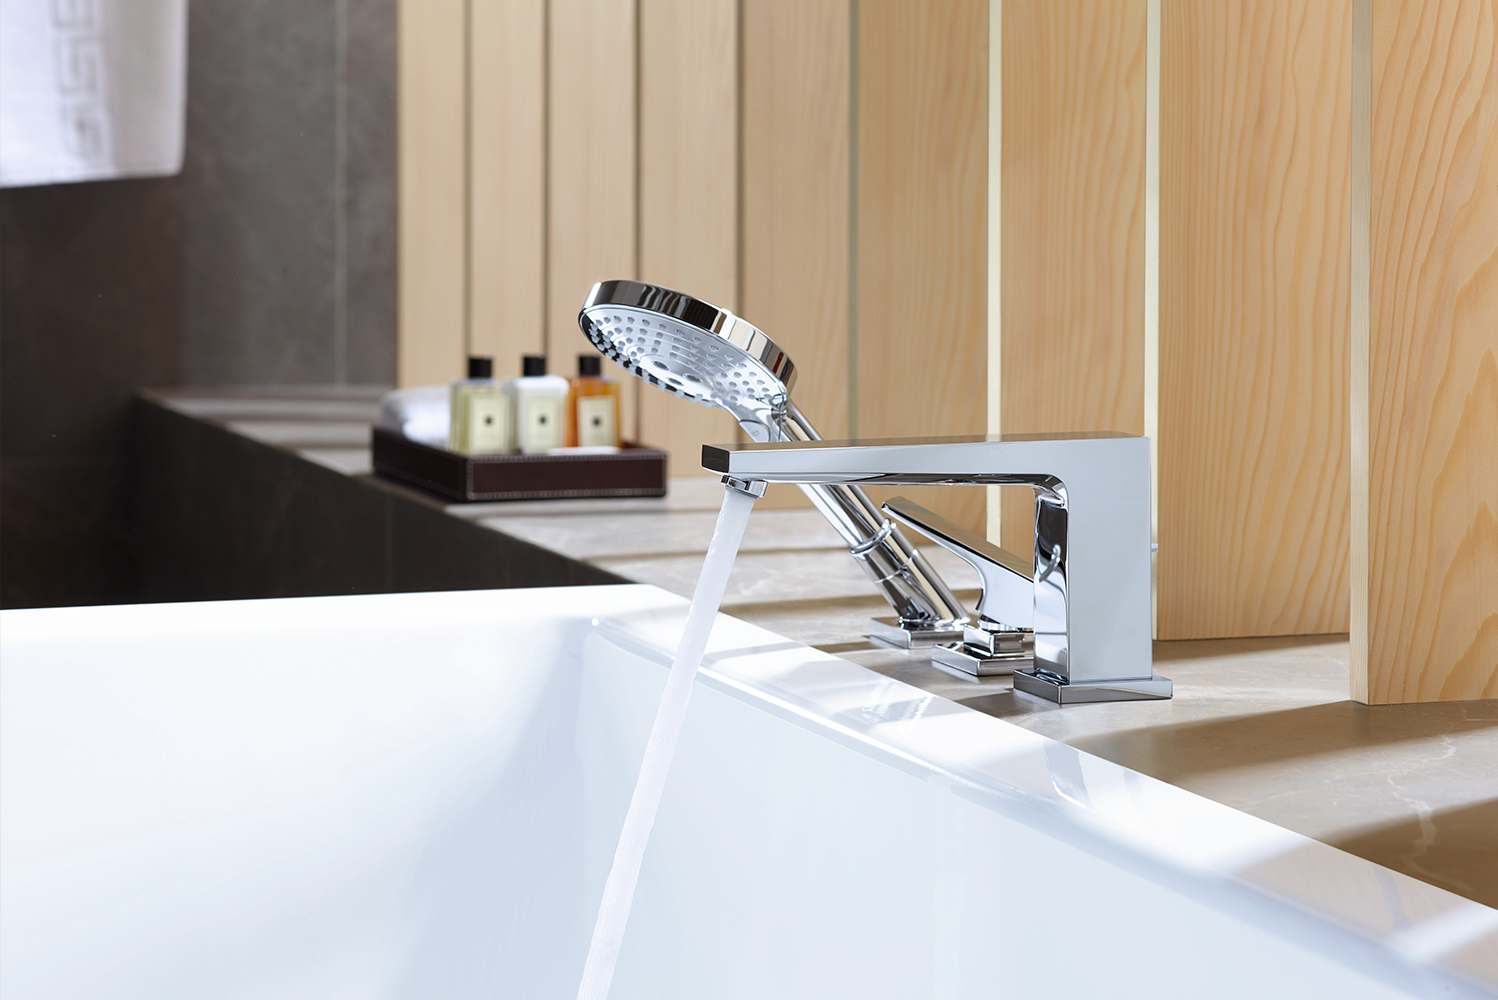 Hansgrohe launched the Metropol collection by Phoenix Design